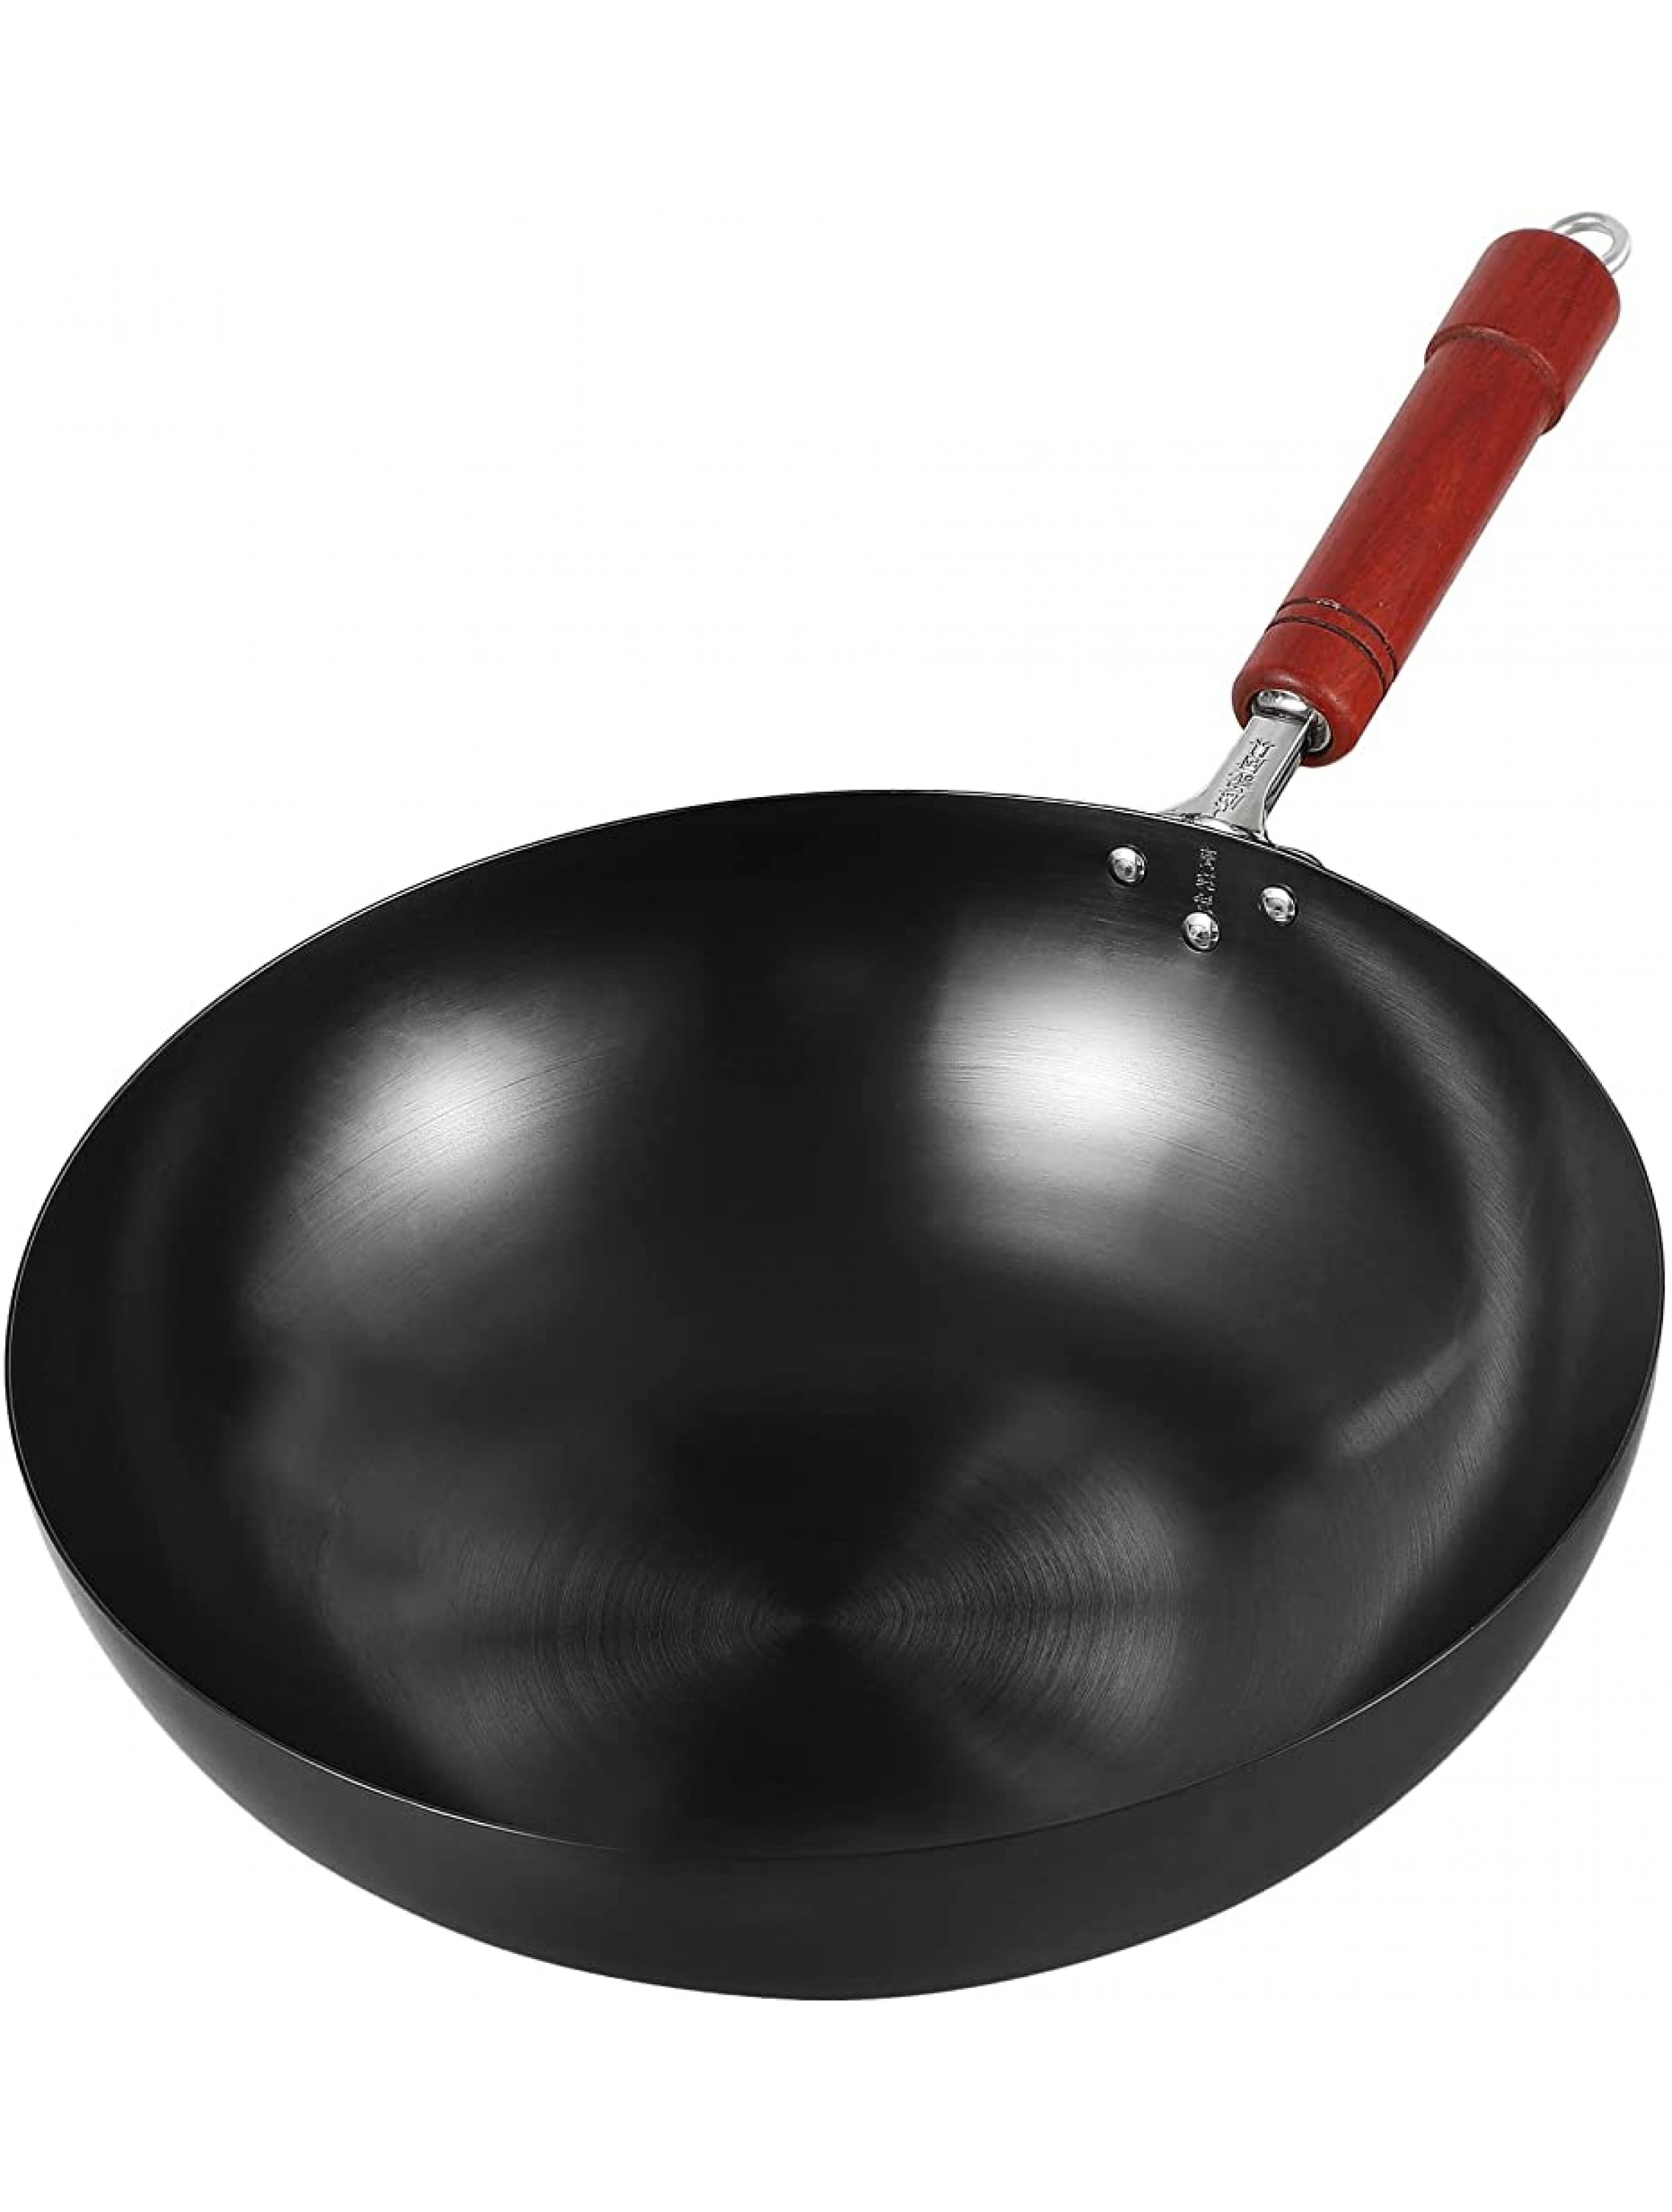 Cast Iron Wok Stir Fry Pan Wooden Handle chef’s pan pre-seasoned nonstick for Chinese Japanese and other cooking - BLHEVTEWV